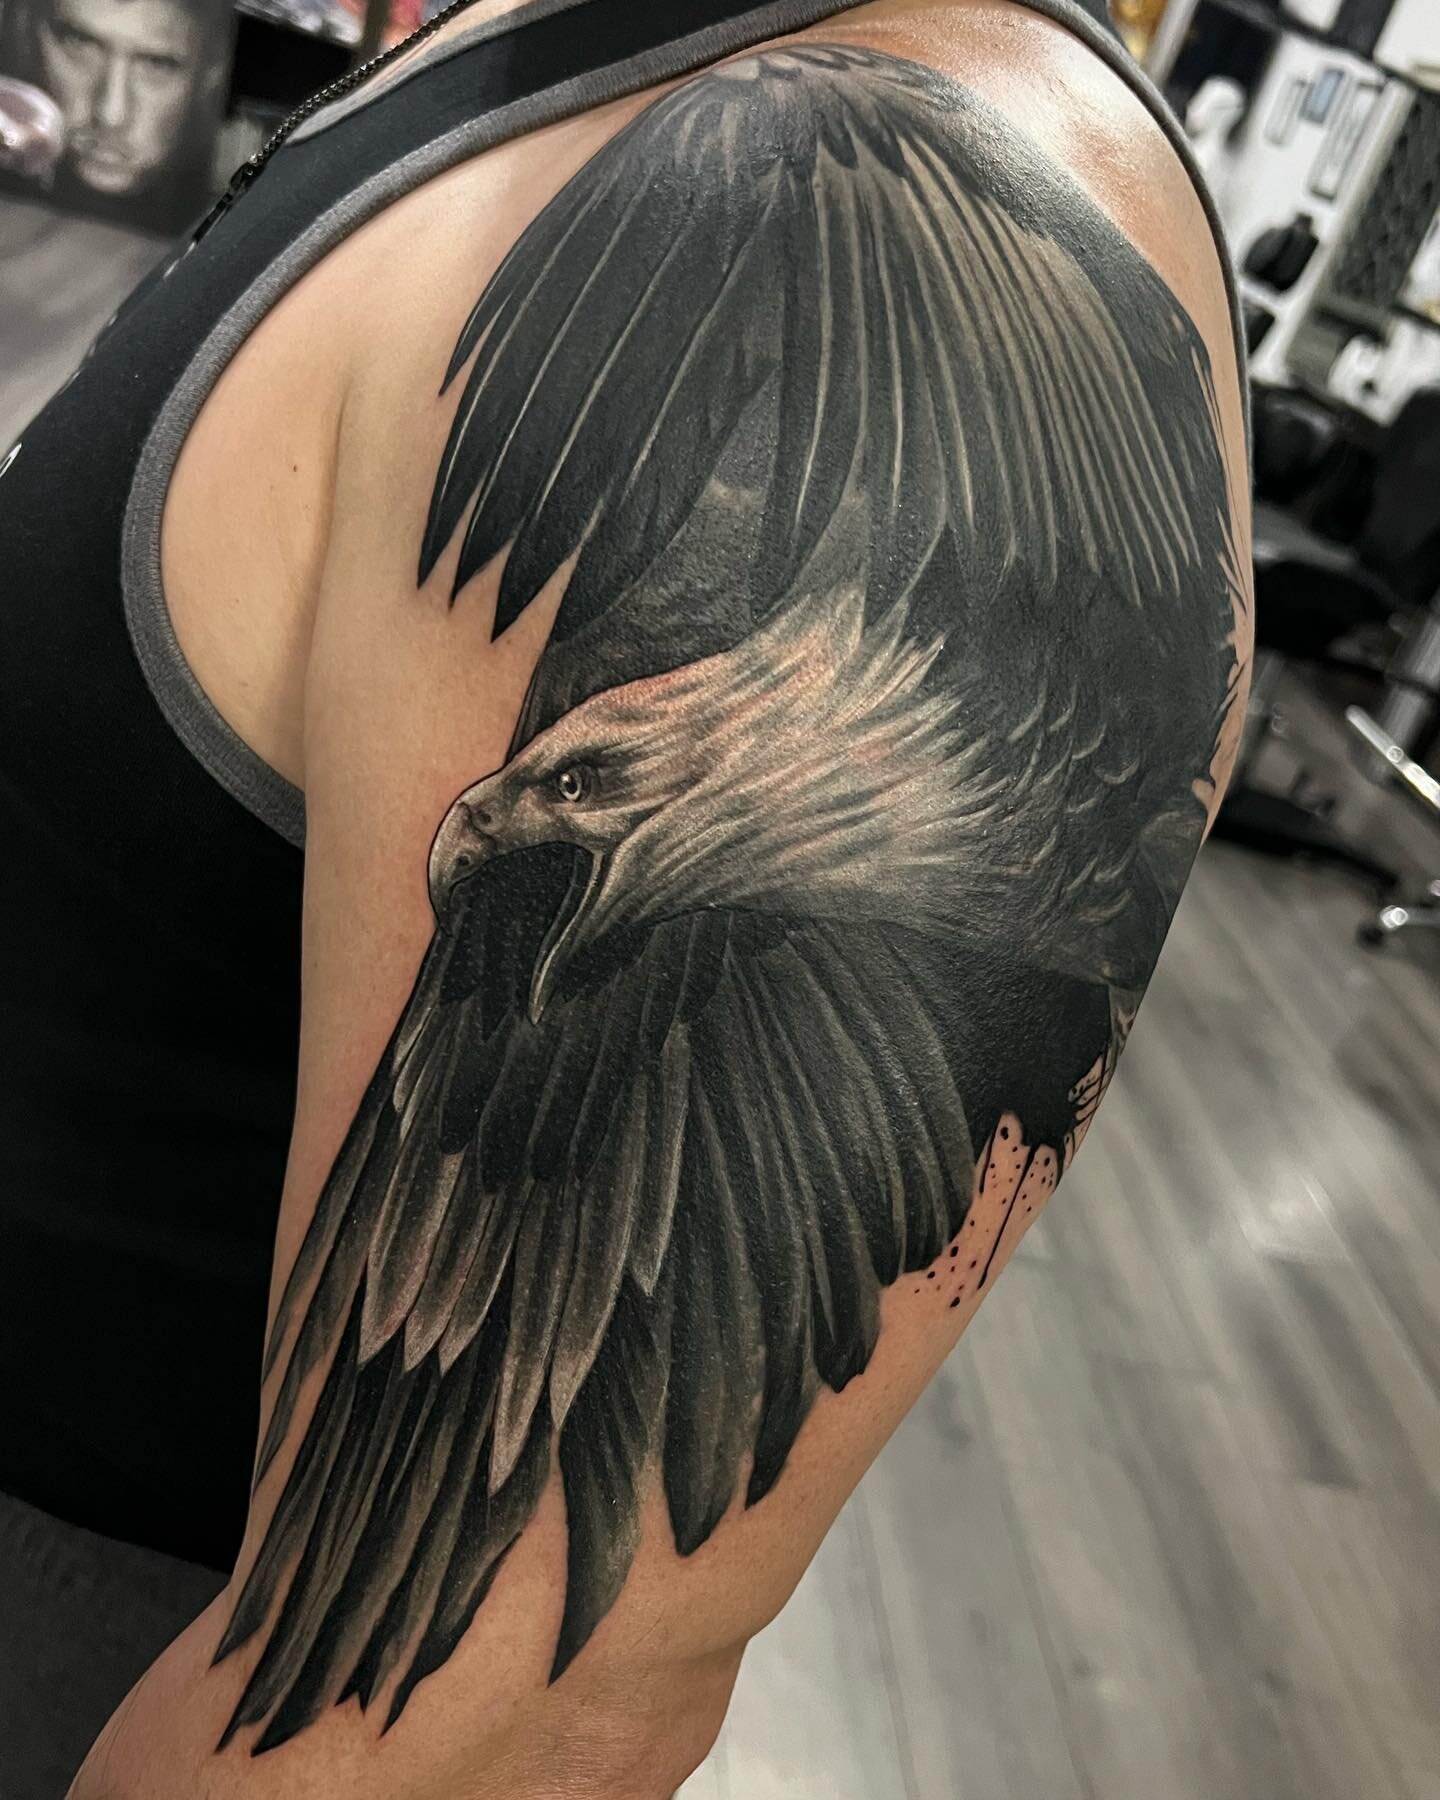 🦅Eagle🦅
Cover-up some old eagles
&bull;
&bull;
&bull;
HMU I actually love doing cover-ups there so much fun.
&bull;
&bull;
&bull;
#eagle #eagletattoo #coveruptattoo #coverup #armtattoo #blackandgreytattoo #colortattoo #chicago #chicagotattooartist 